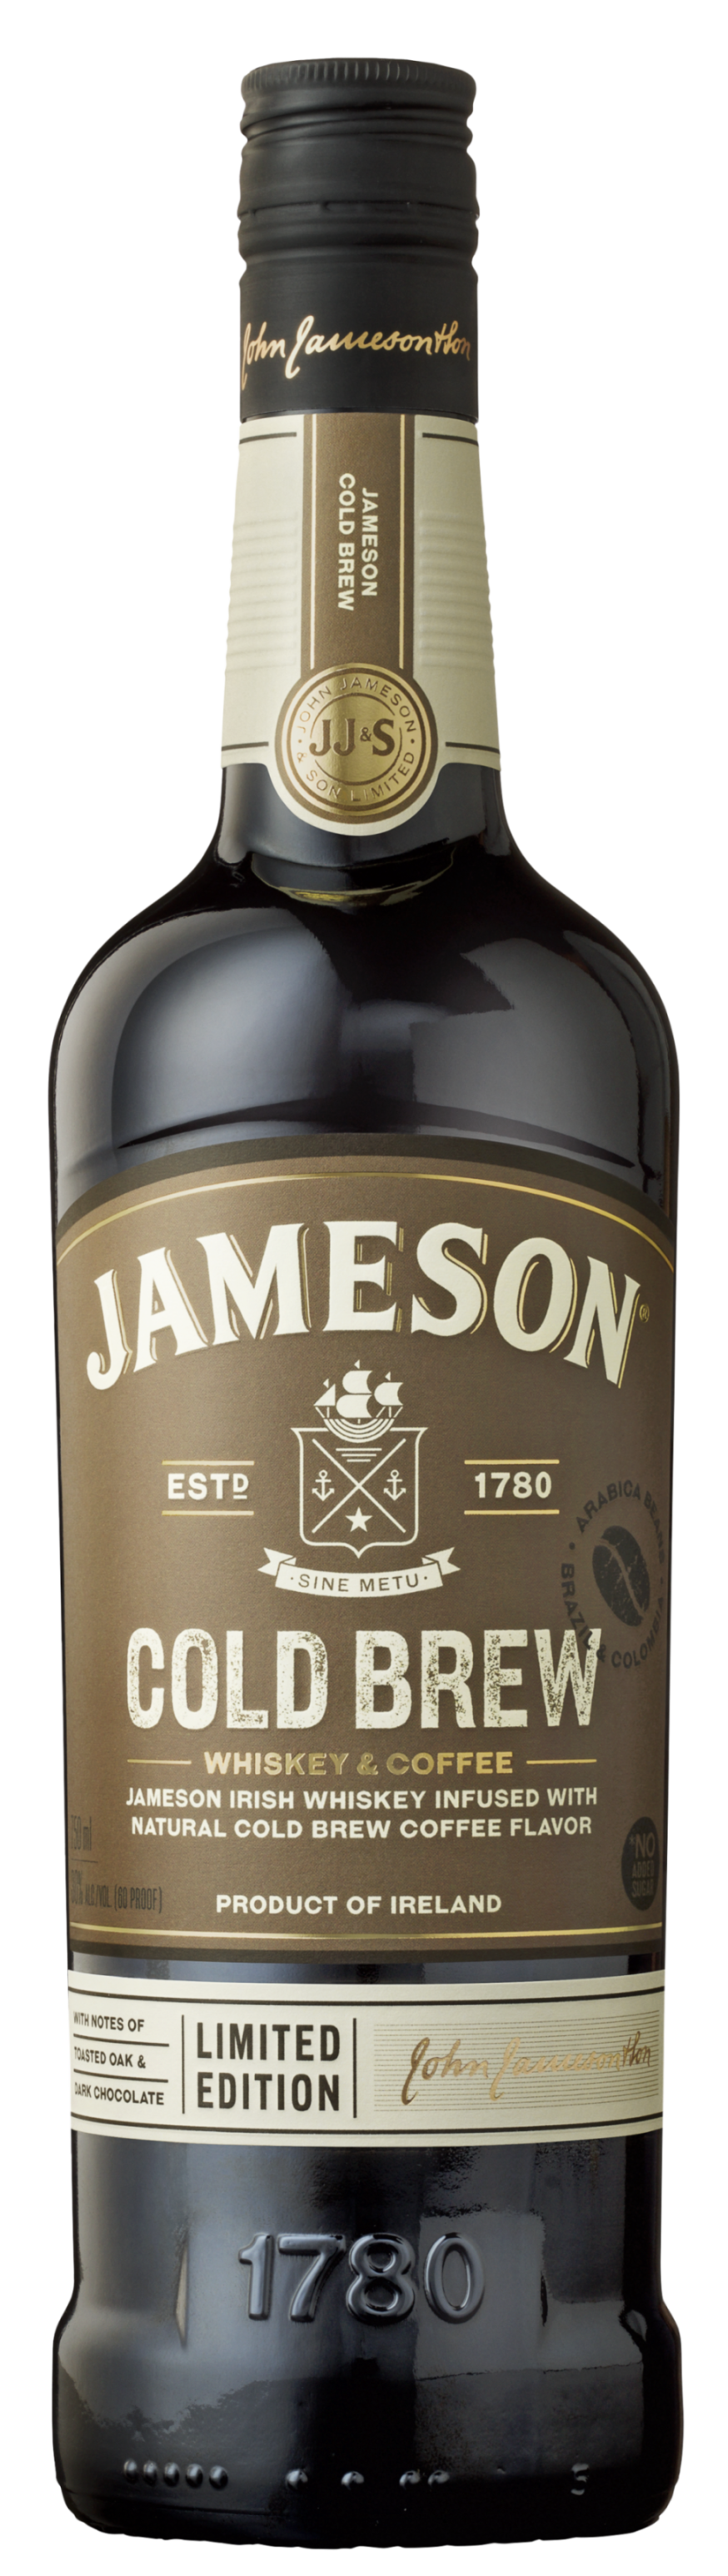 https://www.bottlevalues.com/images/sites/bottlevalues/labels/jameson-cold-brew-coffee-infused-irish-whiskey_1.jpg